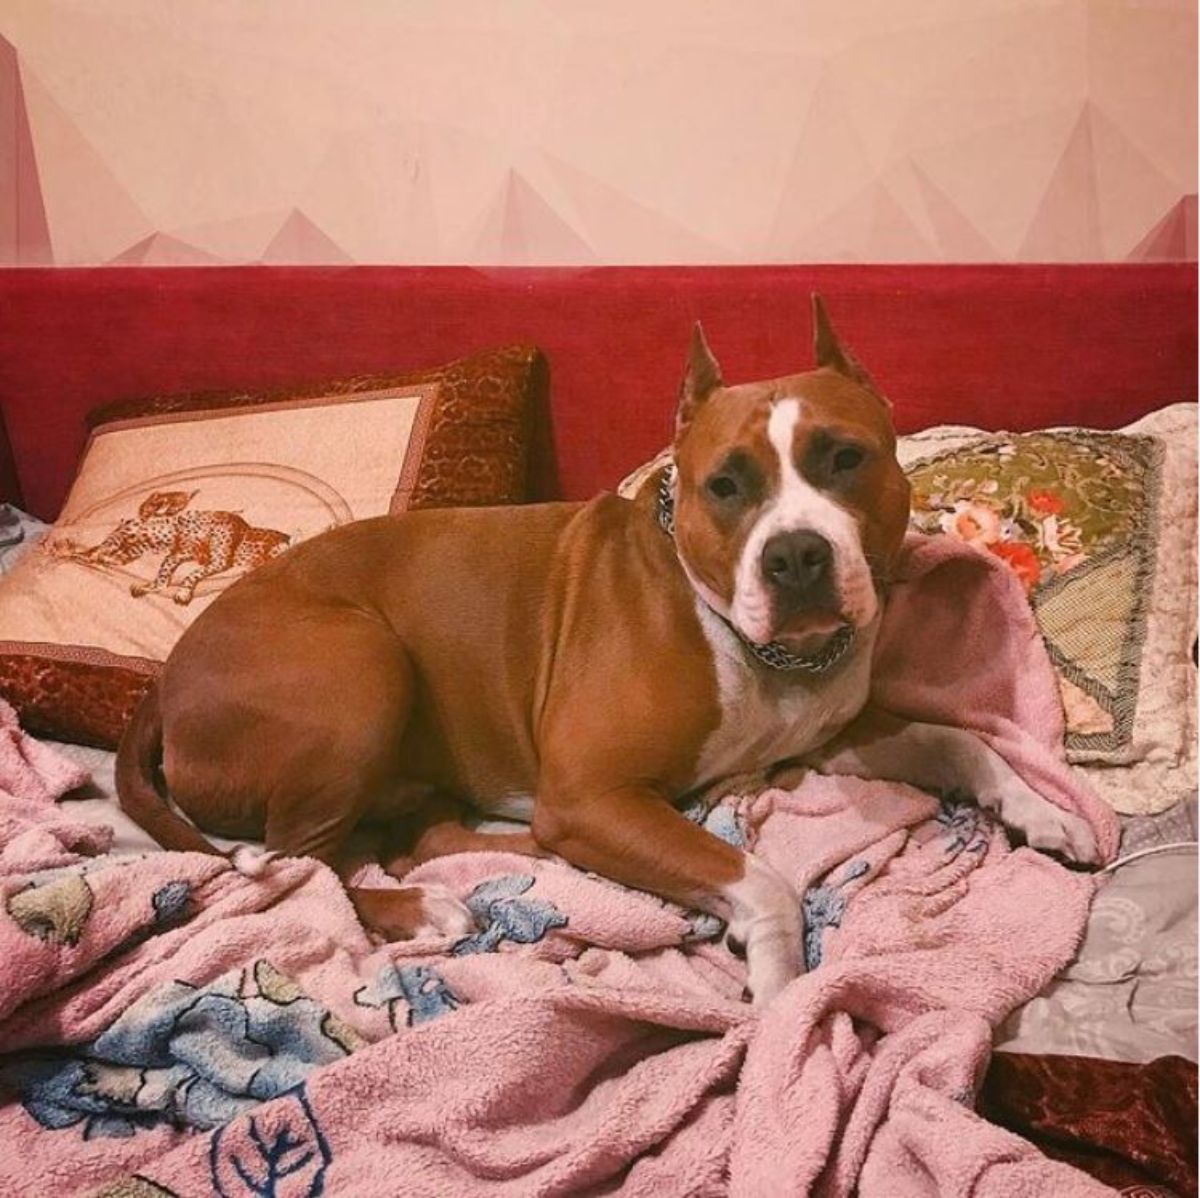 American Staffordshire Terrier lying on the bed